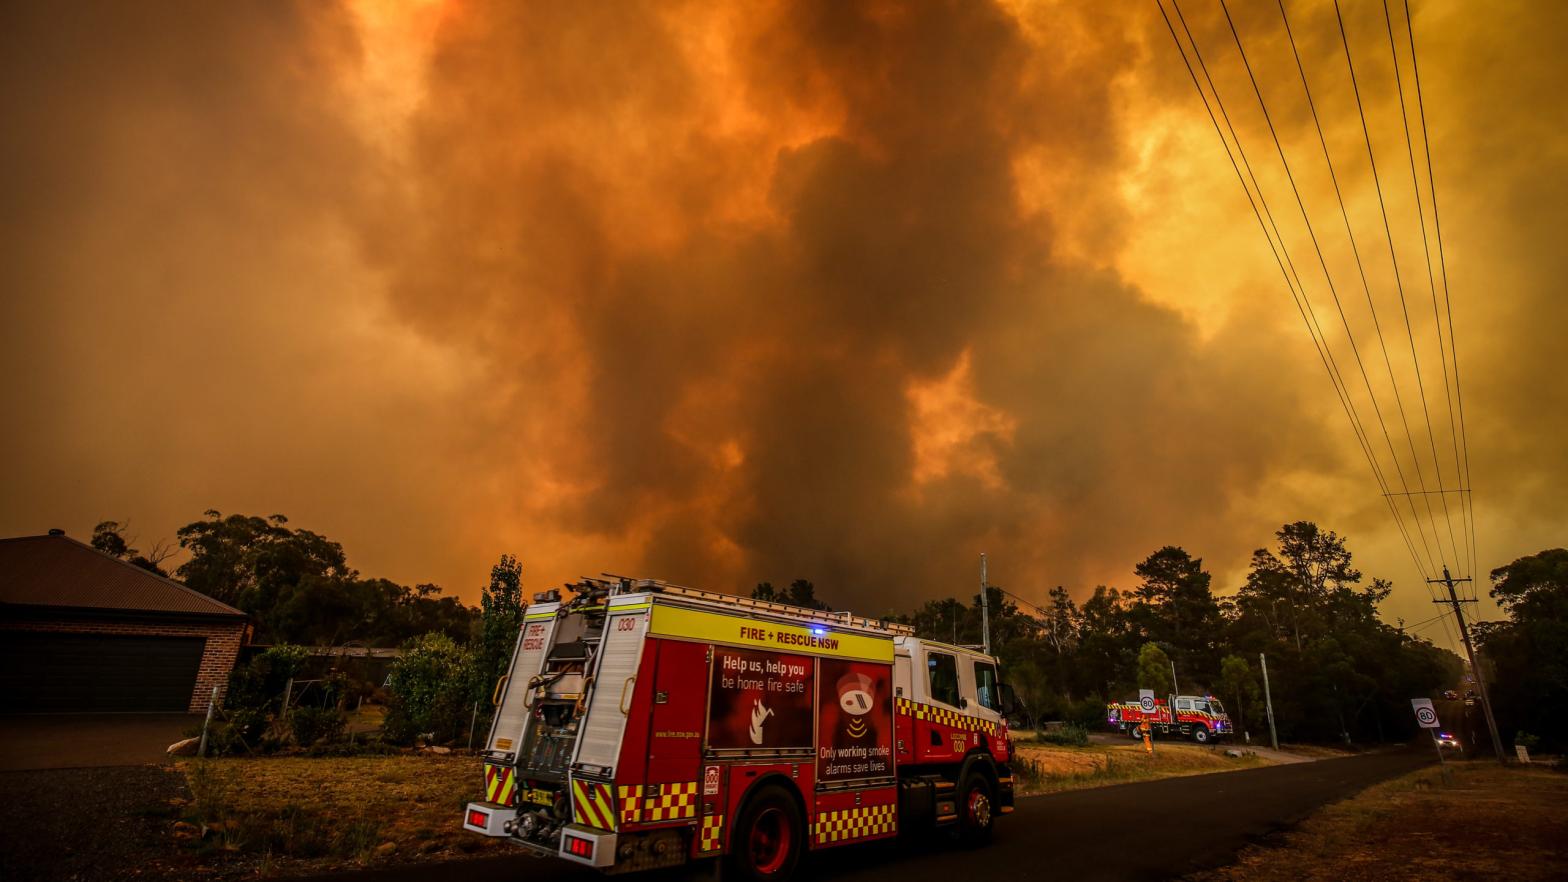 Firemen prepare as a bushfire approaches homes on the outskirts of the town of Bargo on December 21, 2019 in Sydney, Australia. (Photo: David Grey, Getty Images)